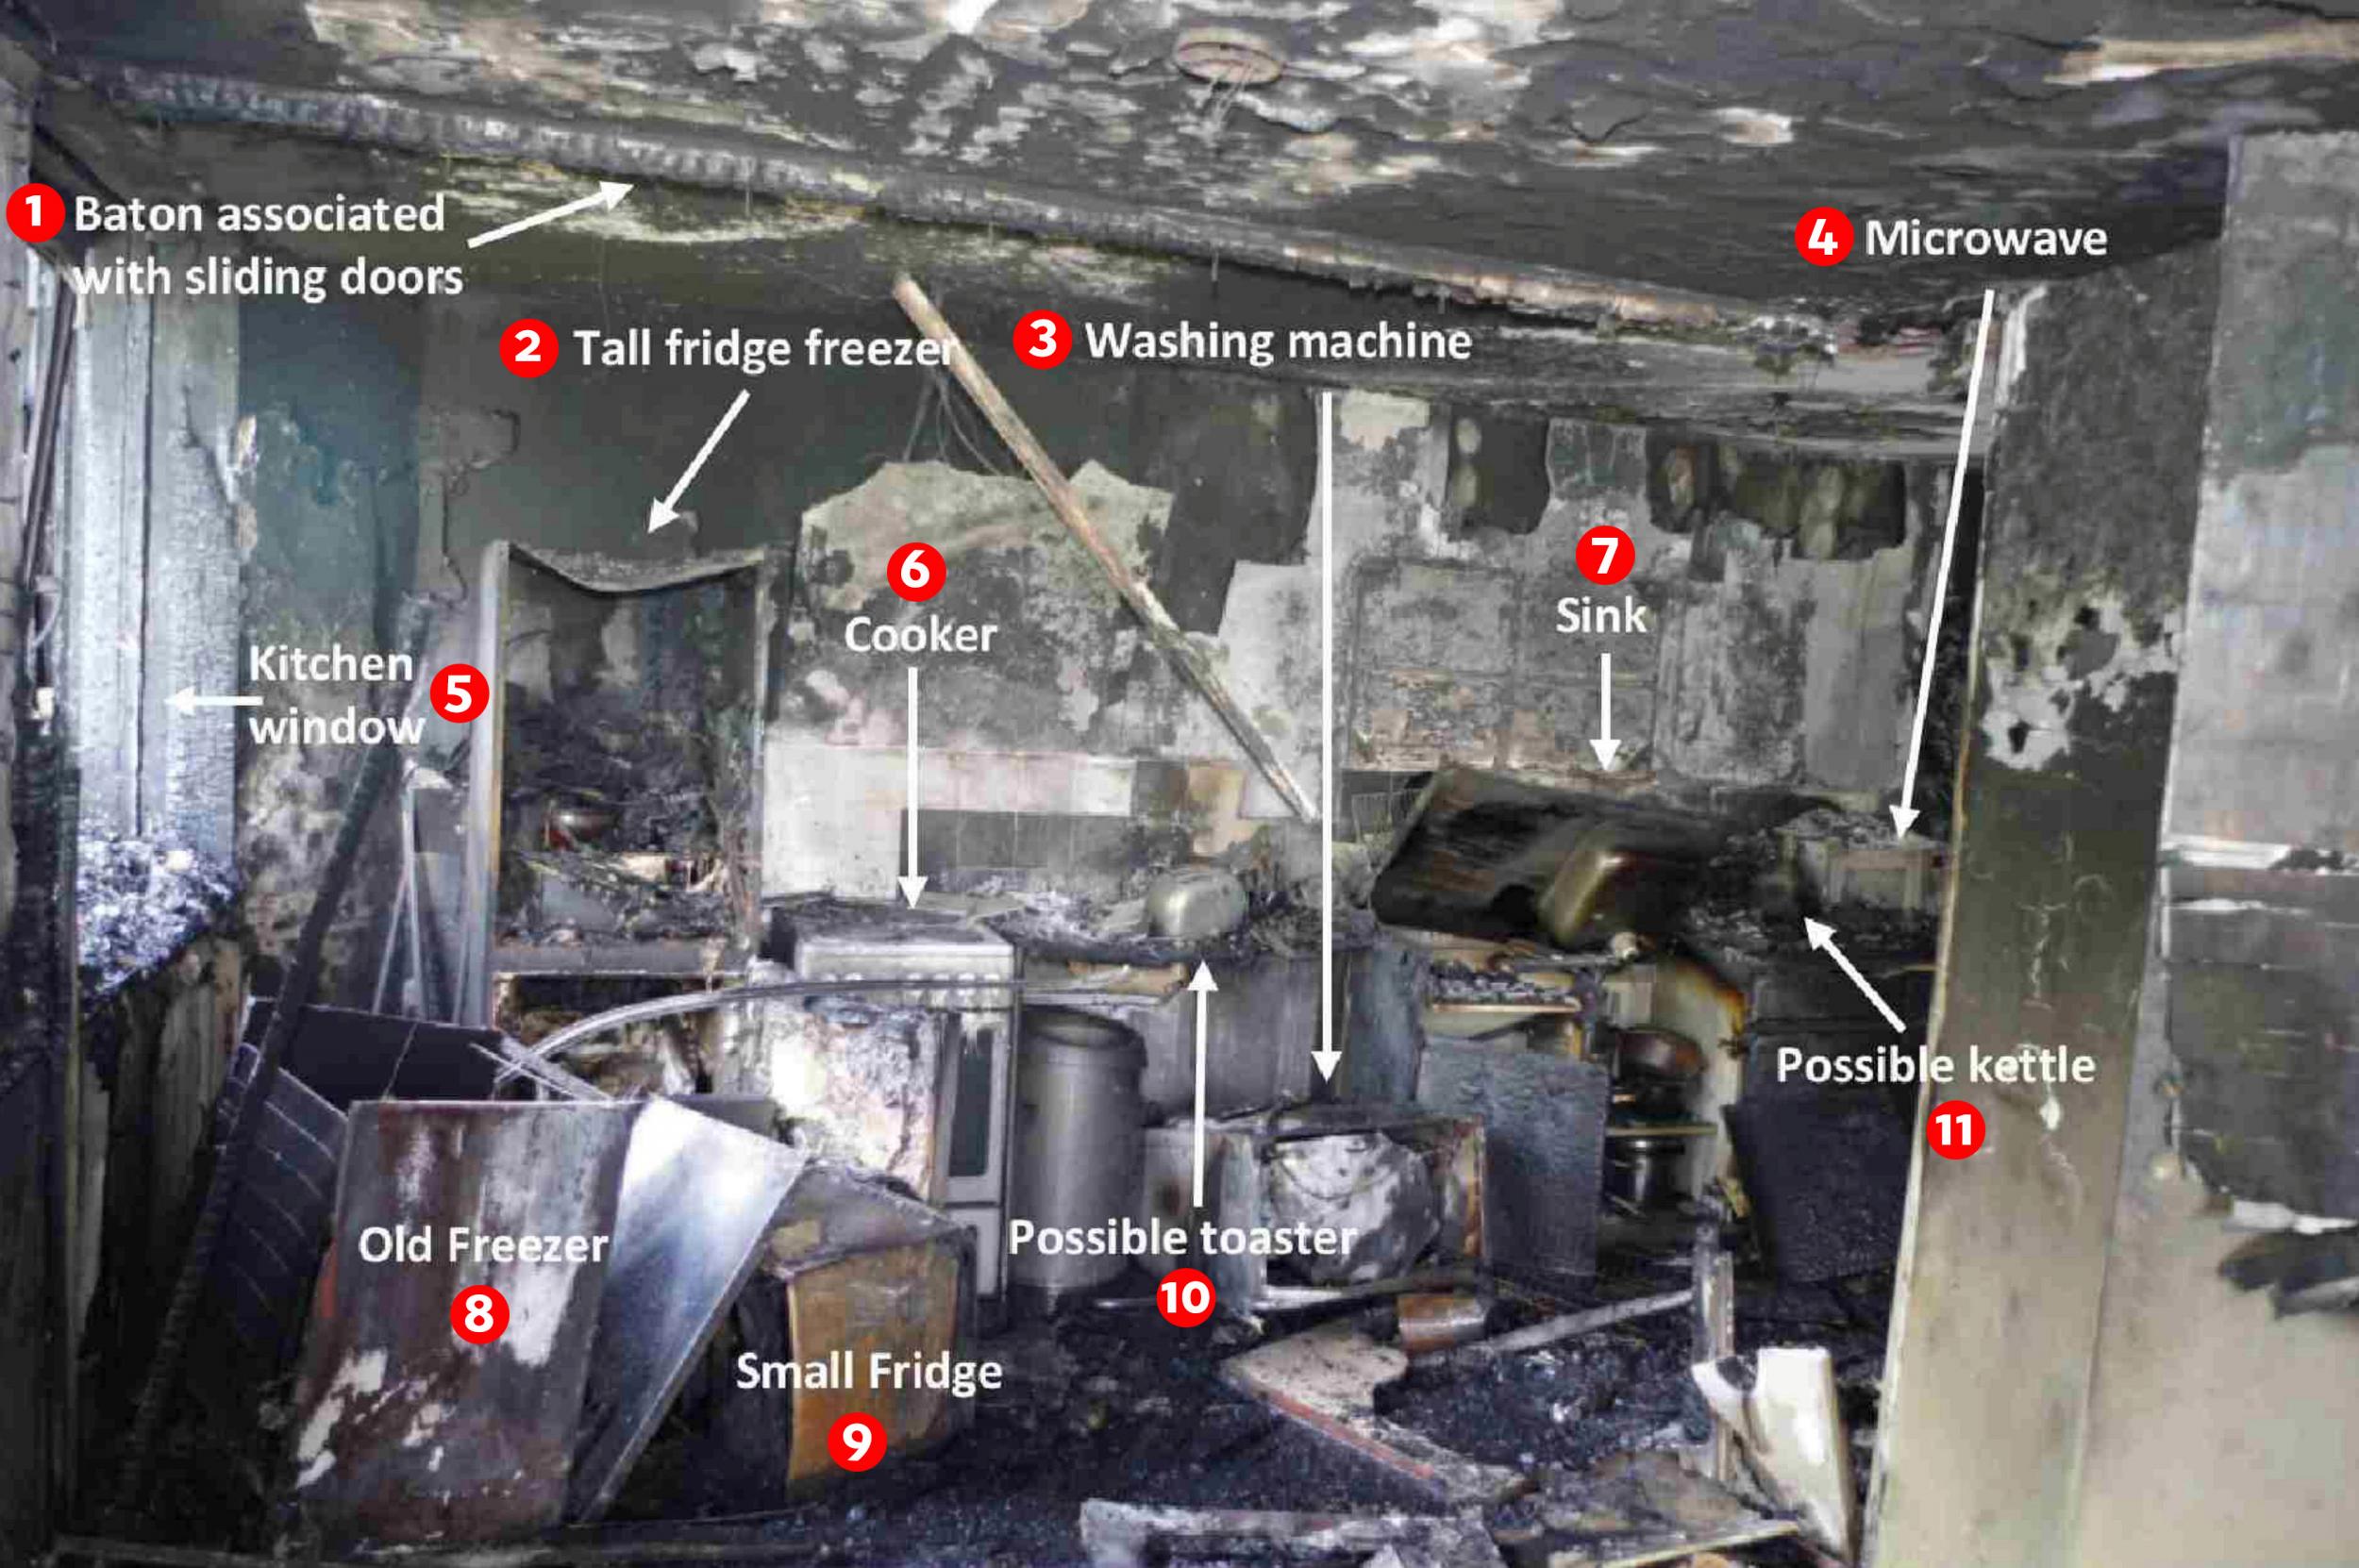 An image of the flat where the Grenfell Tower fire started